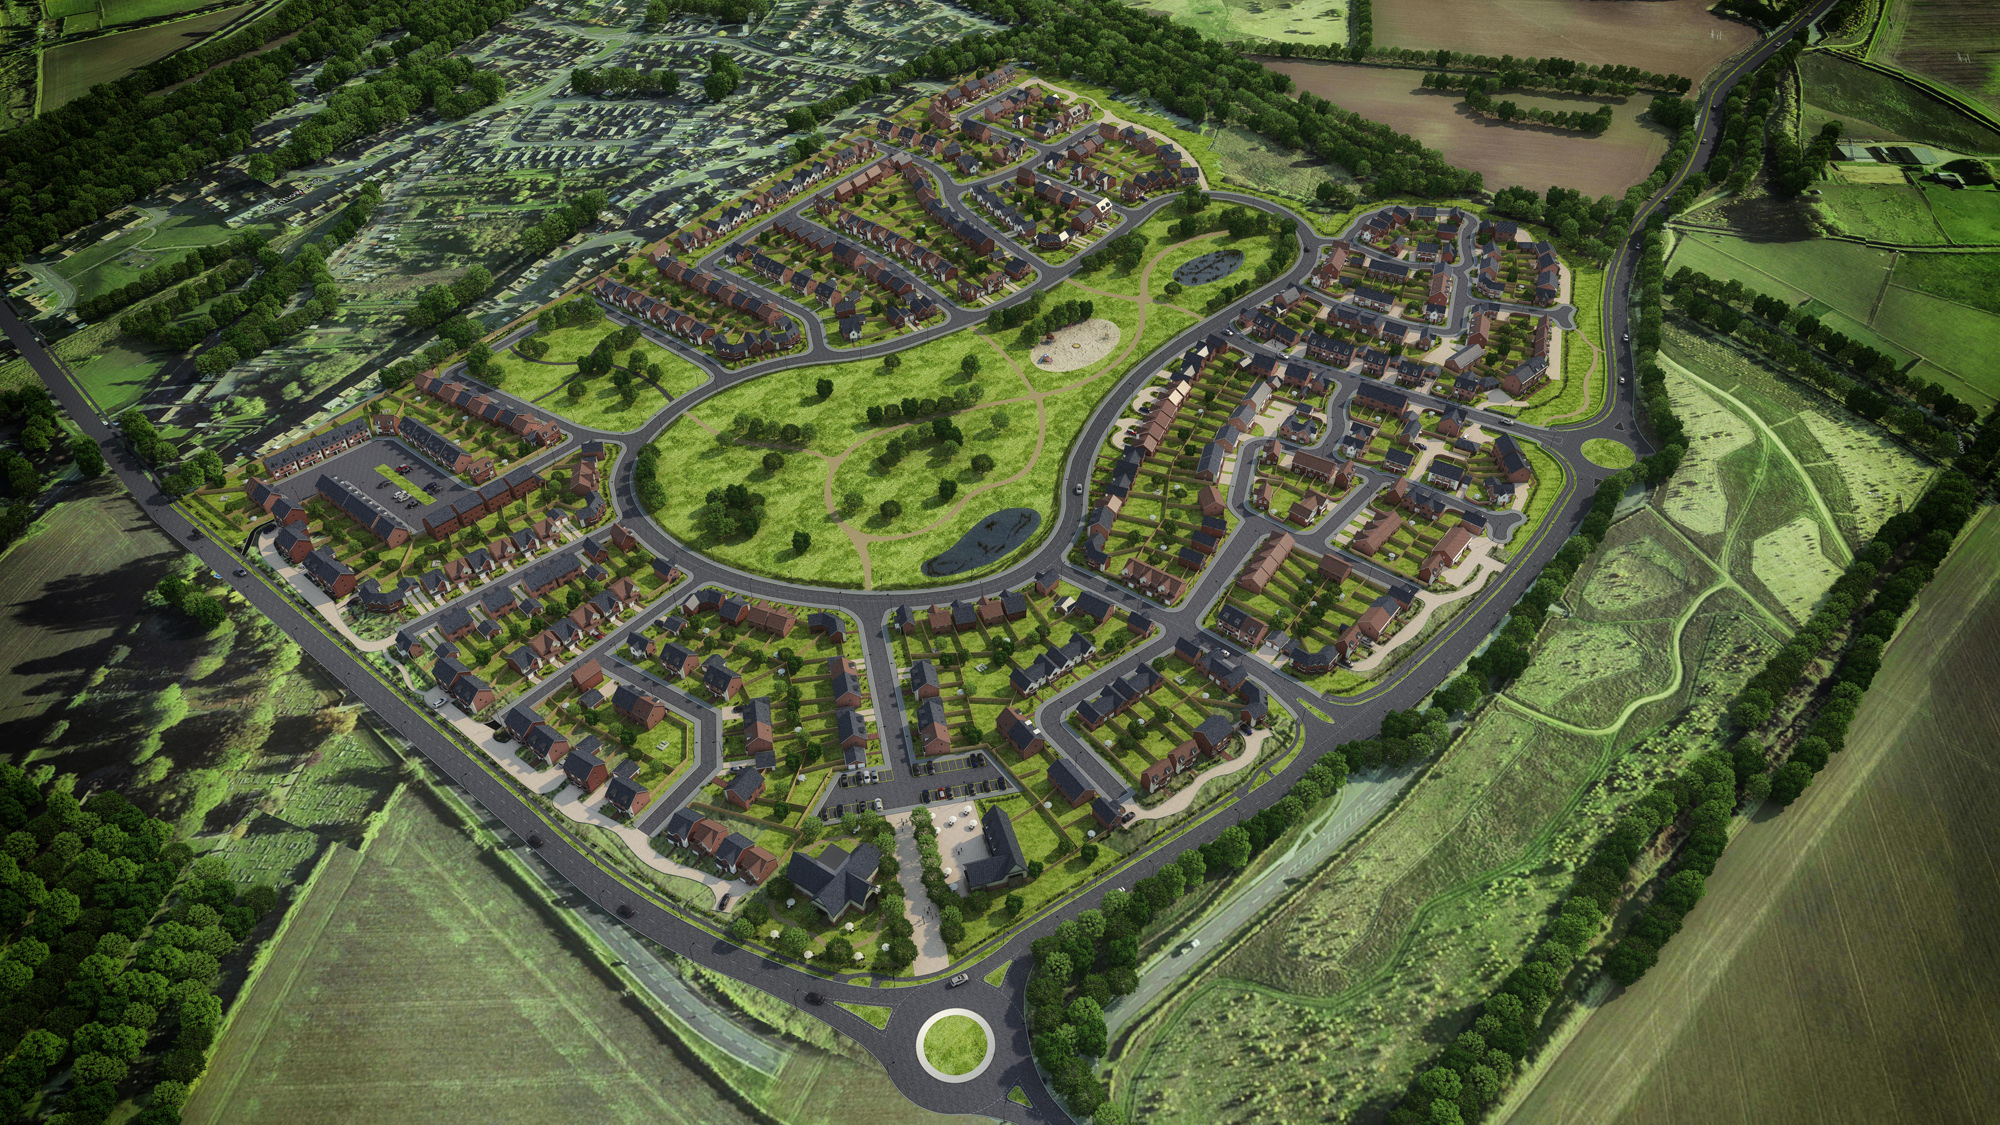 Keepmoat Homes to deliver thousands of new homes in partnership with Homes England